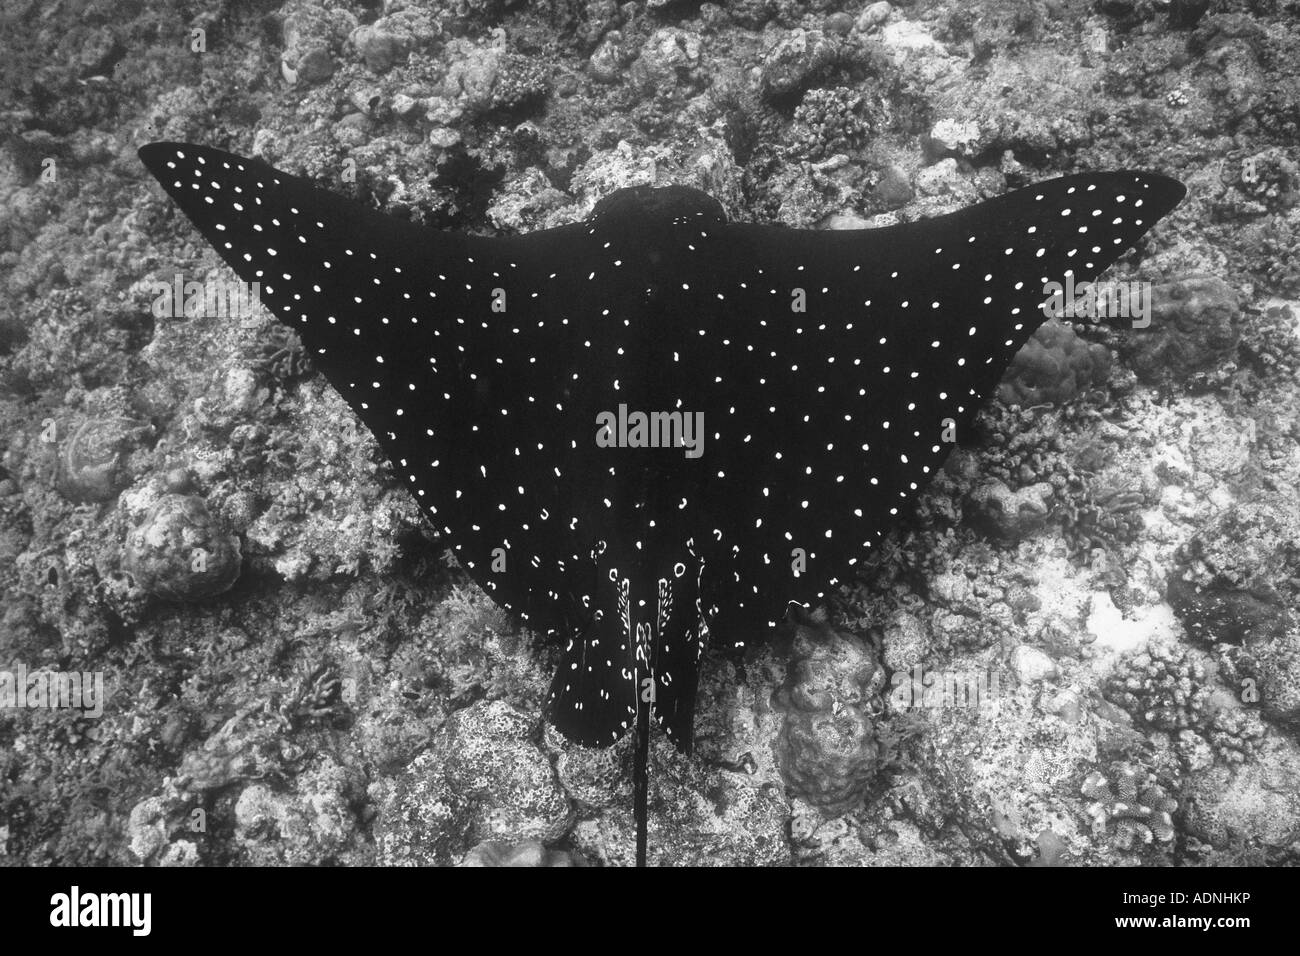 A Spotted eagleray, Aetobatis narinari, swims above a coral reef seeking food in the rubble substrate. Stock Photo